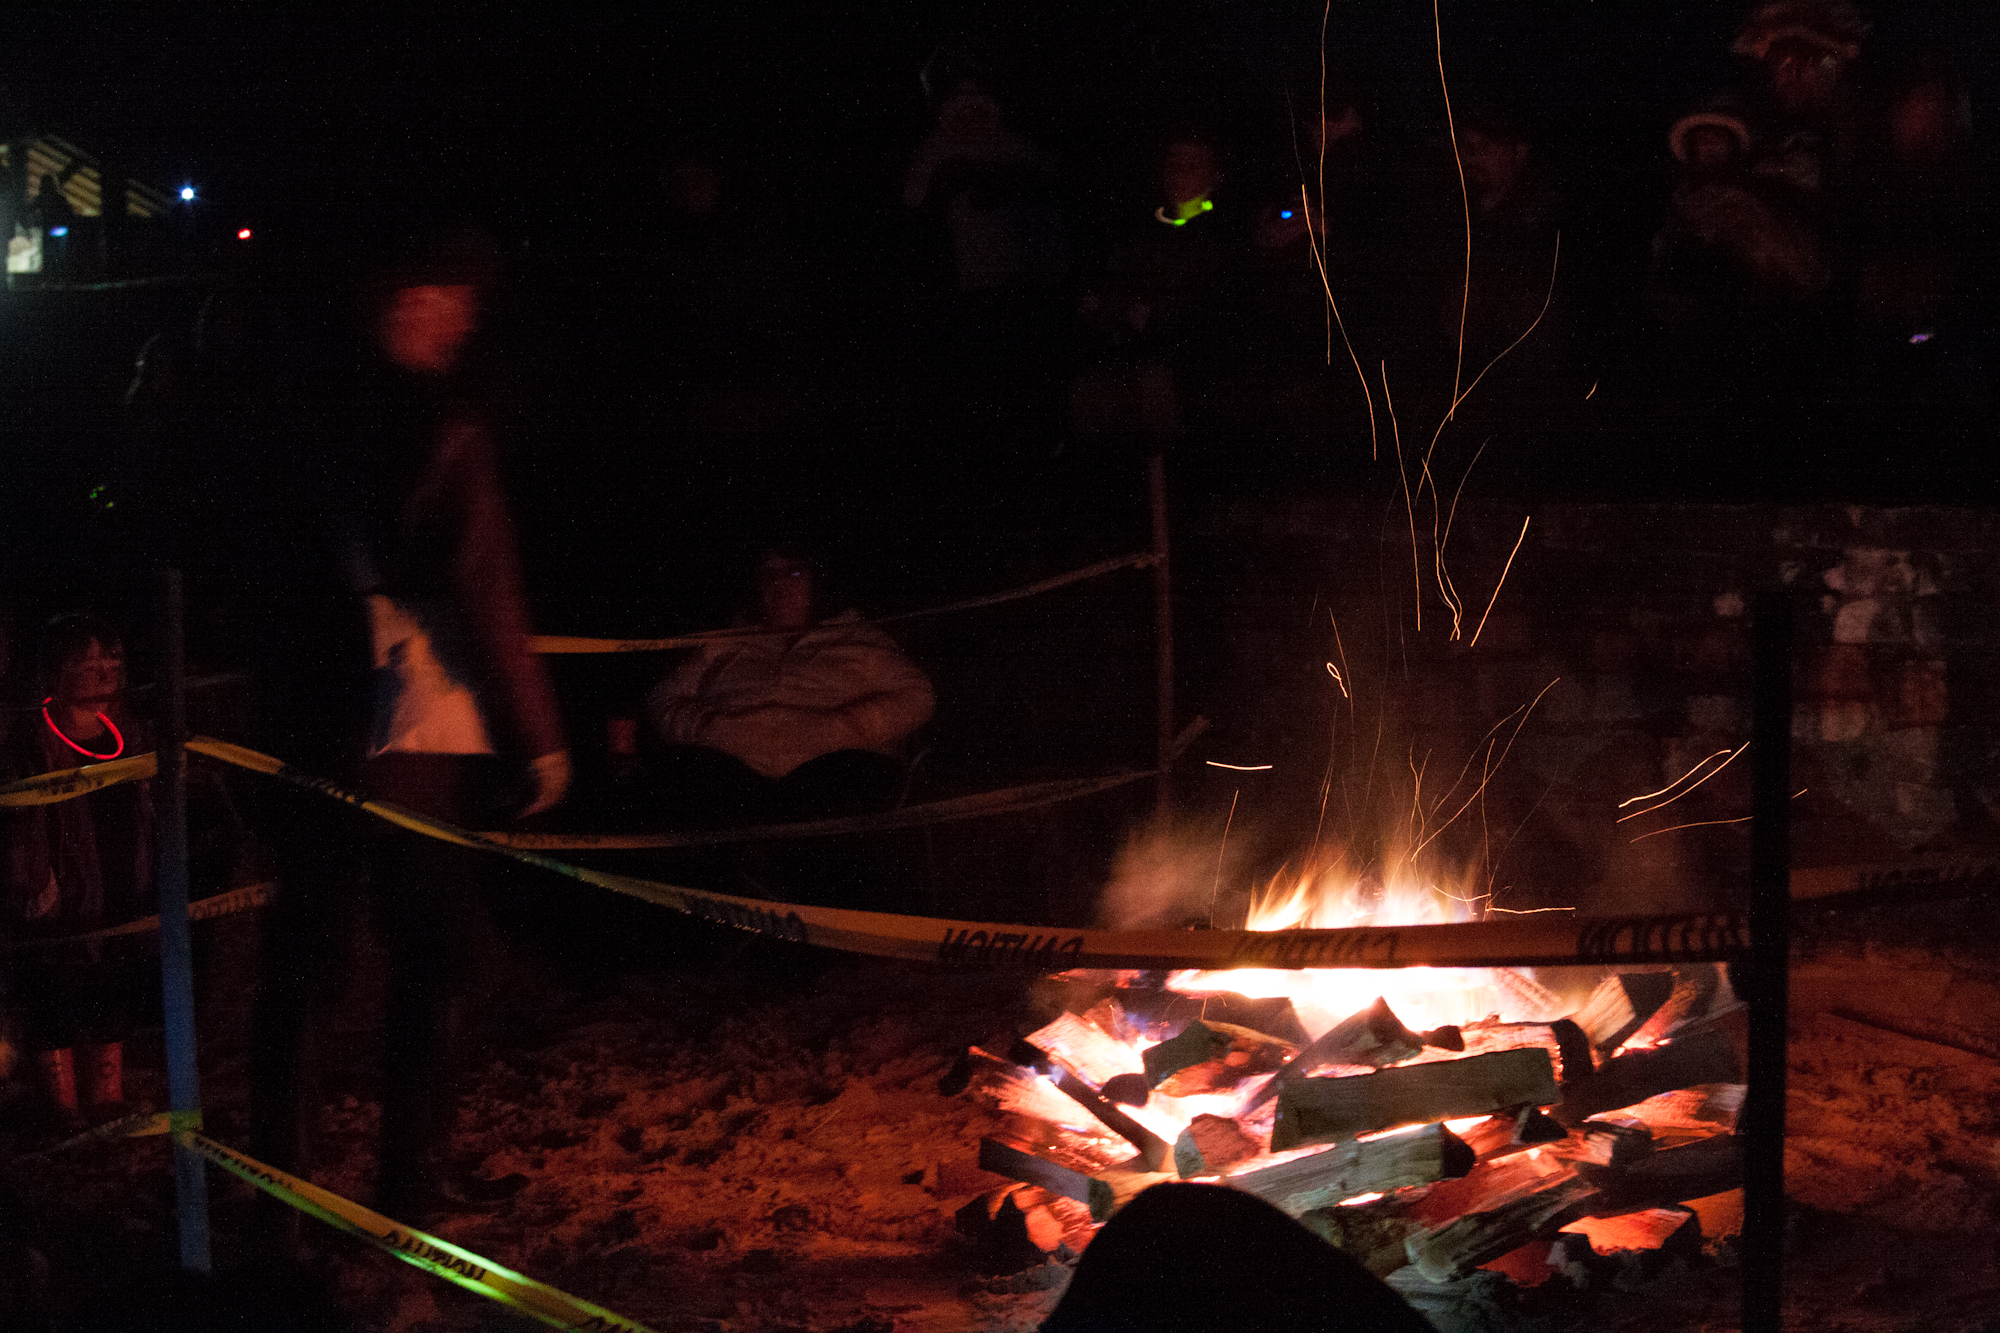 Huber stands at the bonfire and tells historical tales.